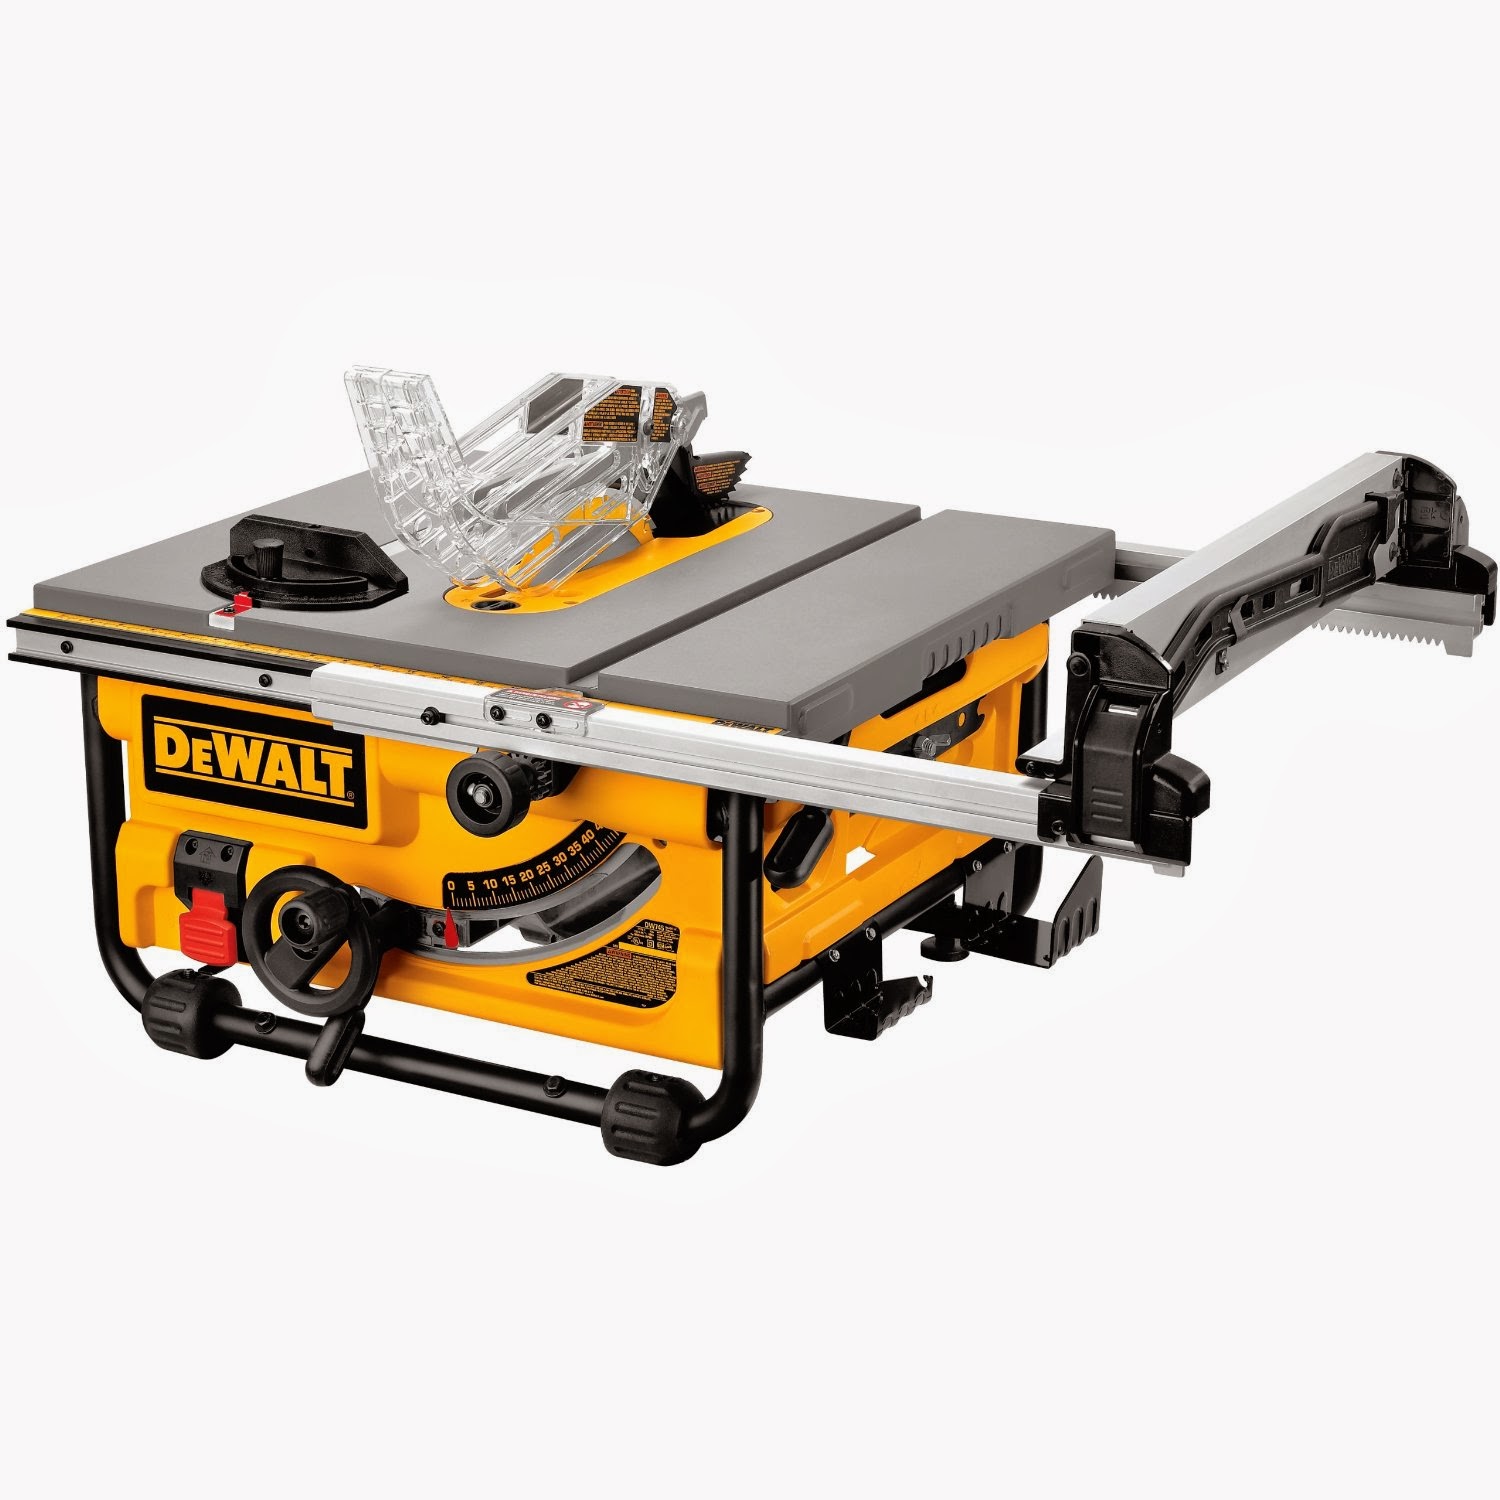 Table saw 16 inch